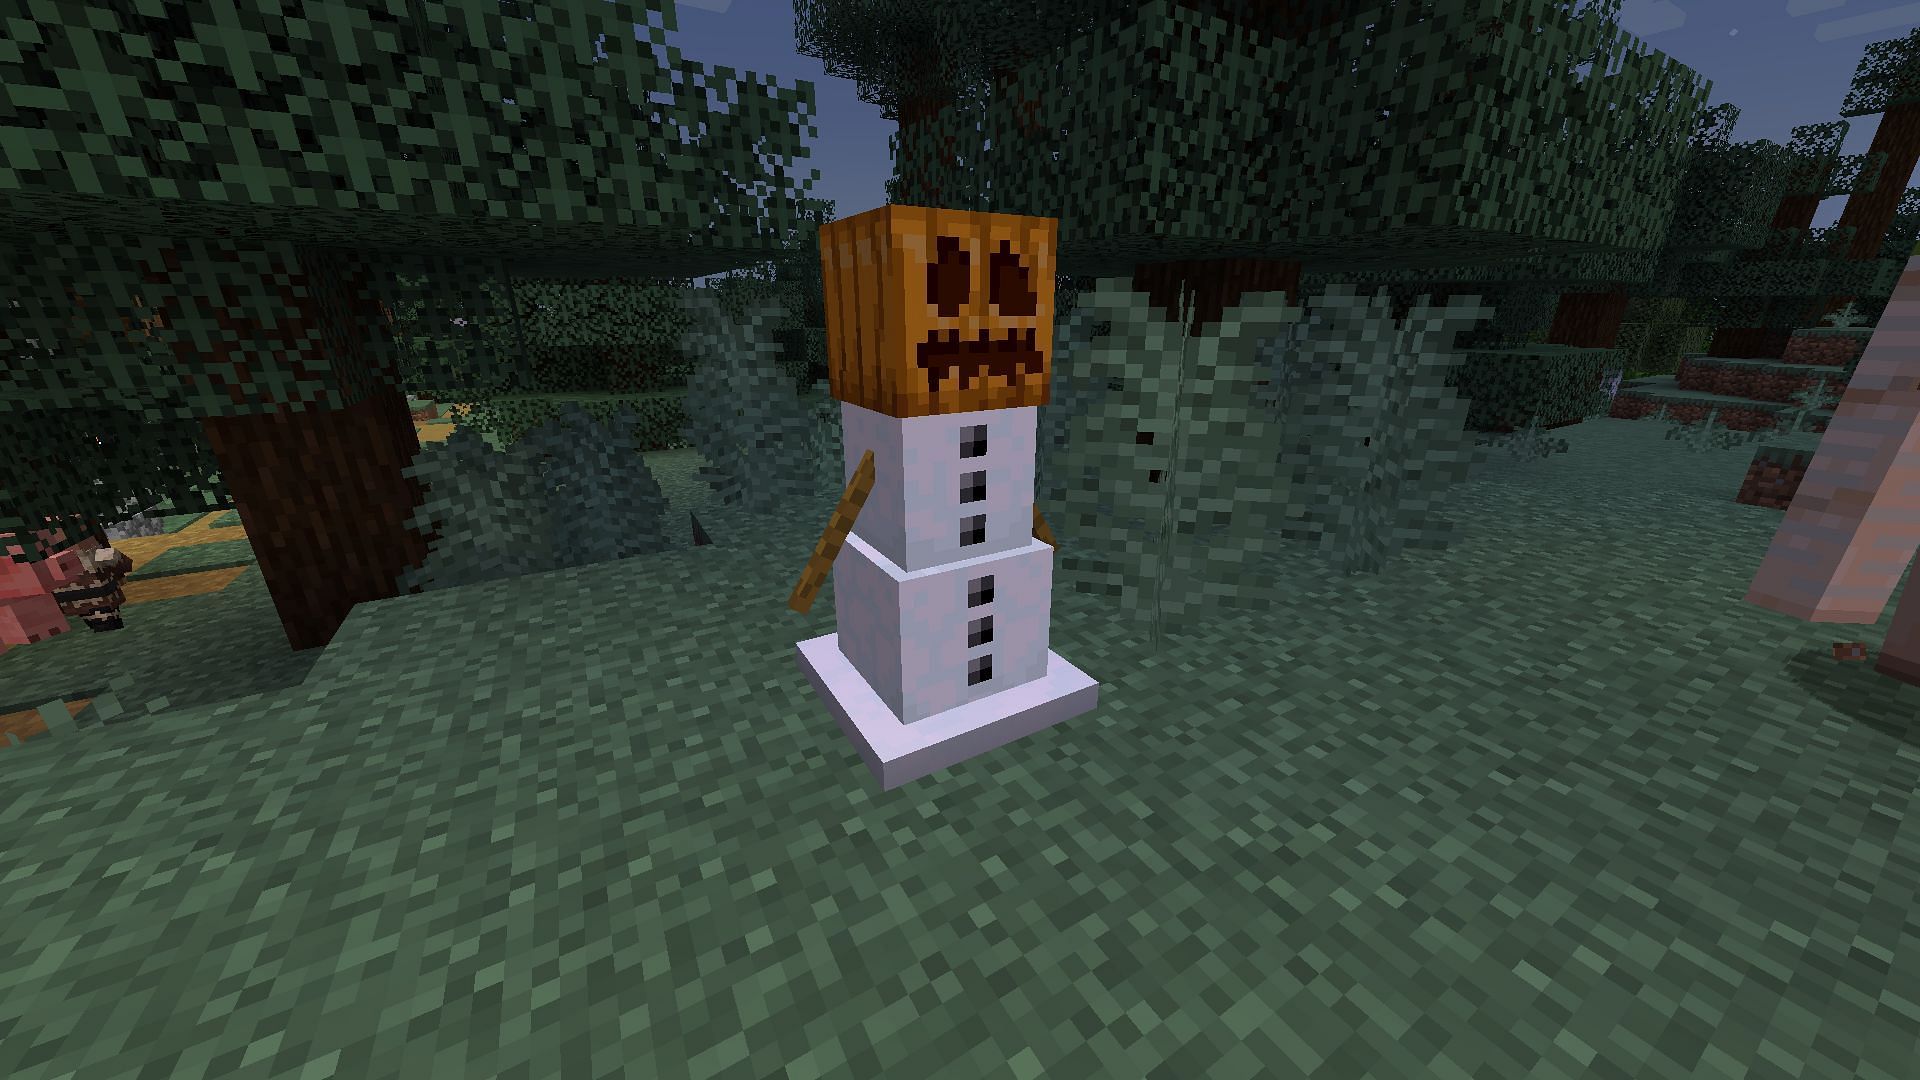 Snow Golems are great allies in fighting hostile mobs in Minecraft (Image via Mojang)